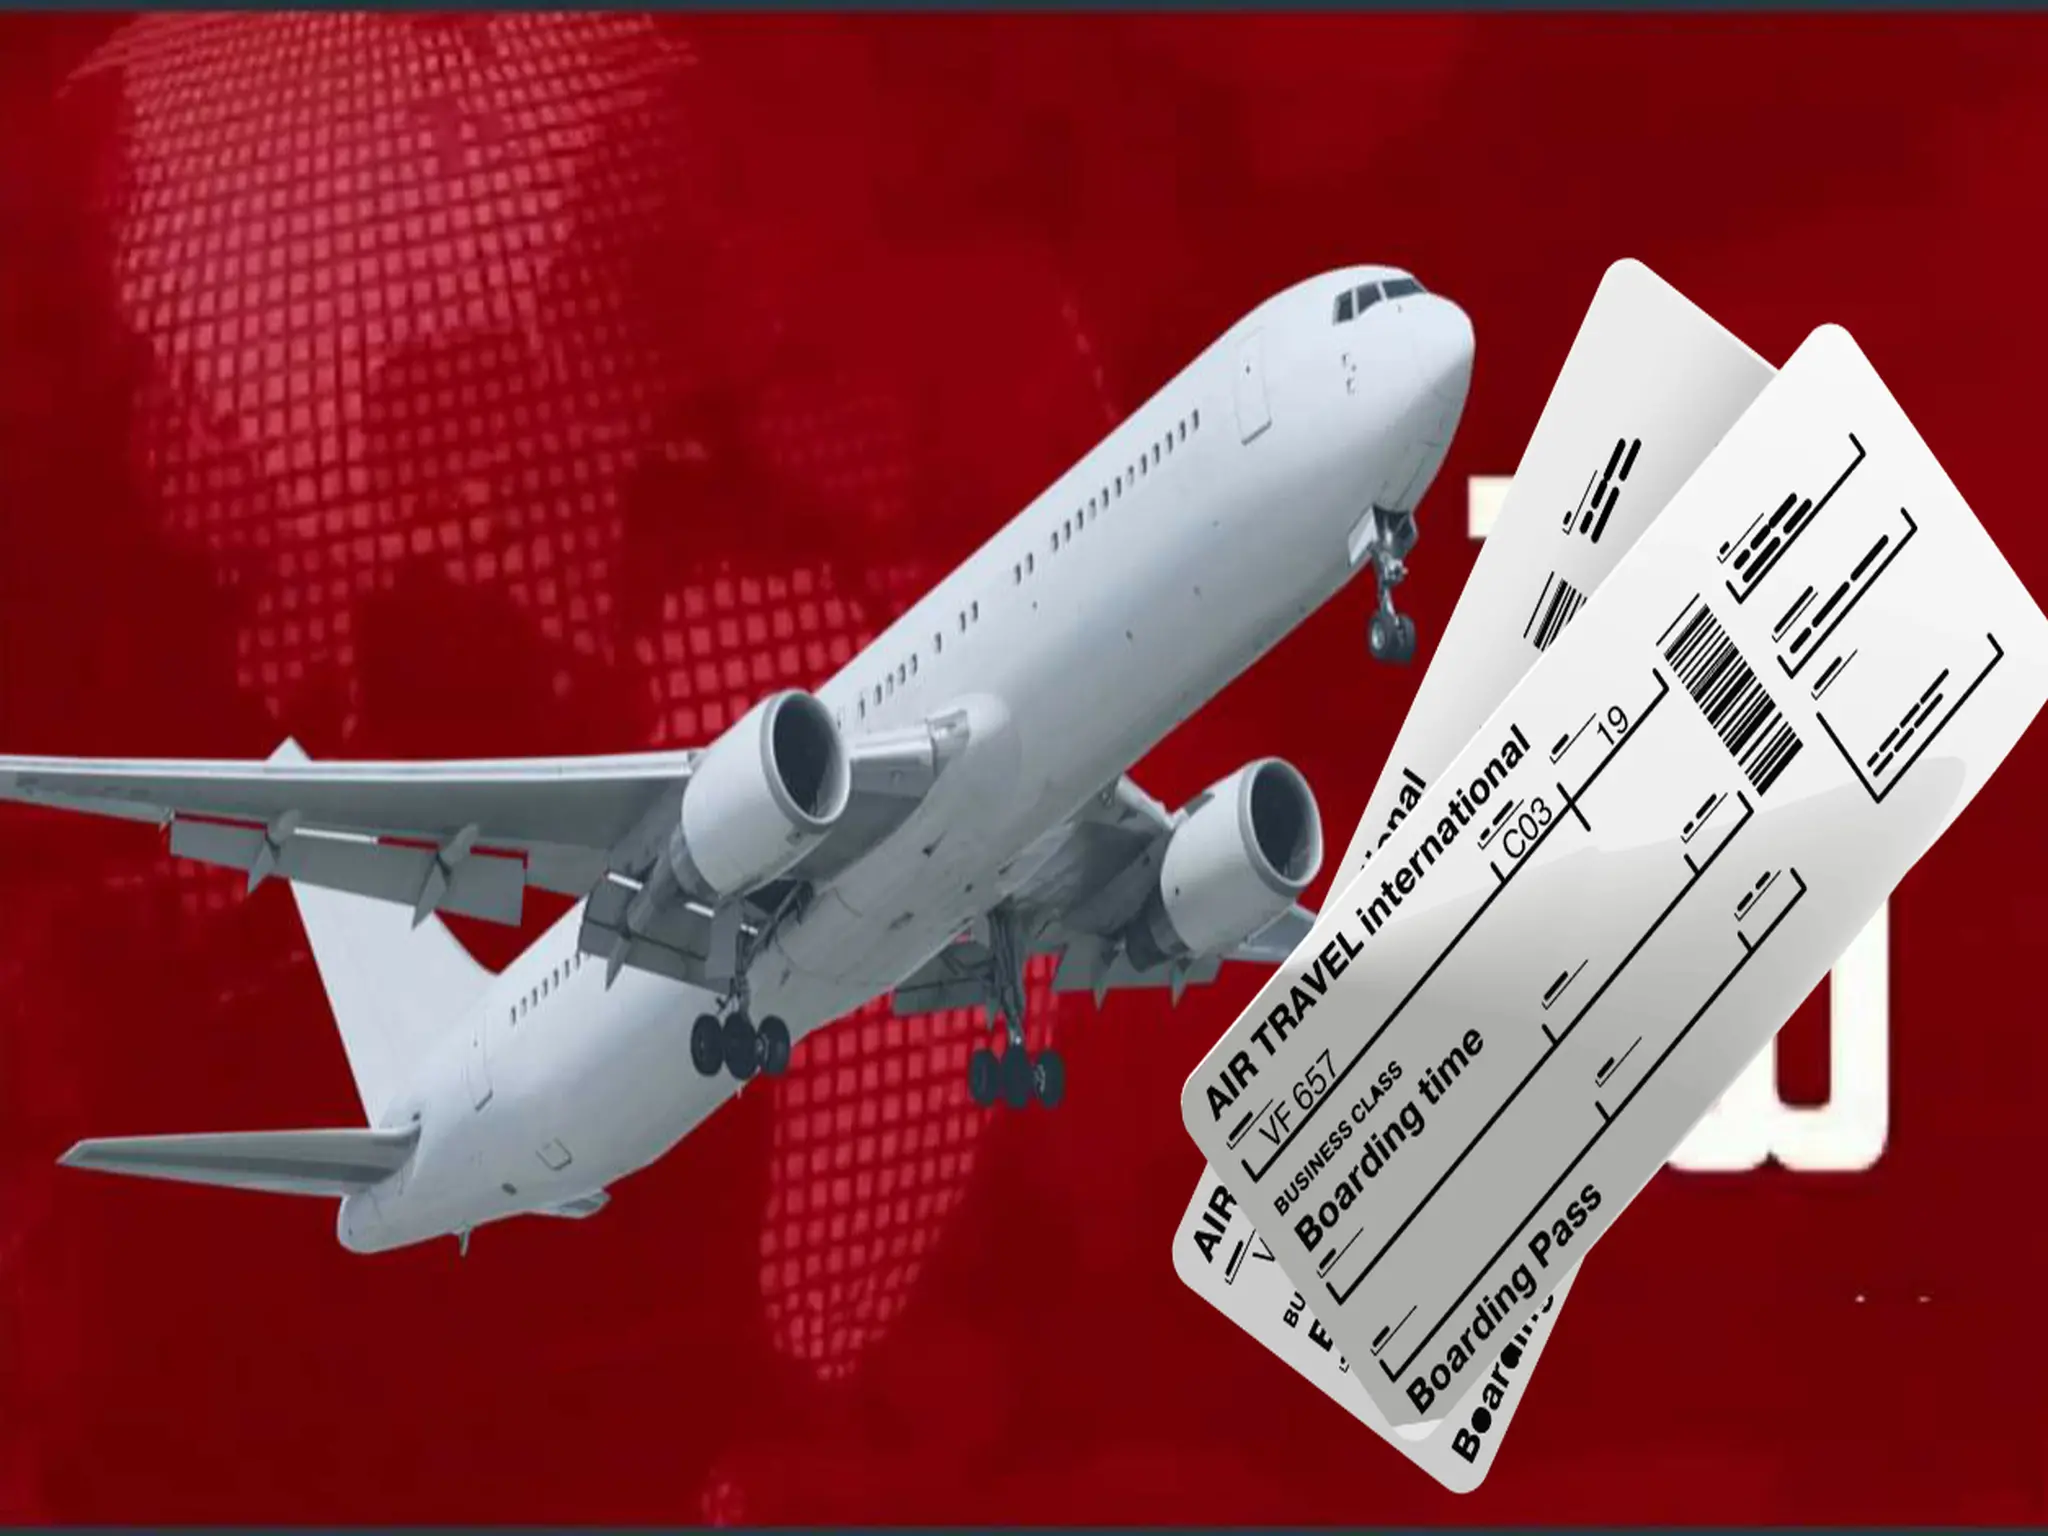 Air tickets worth 1 dirham for travelers from Dubai to some international destinations